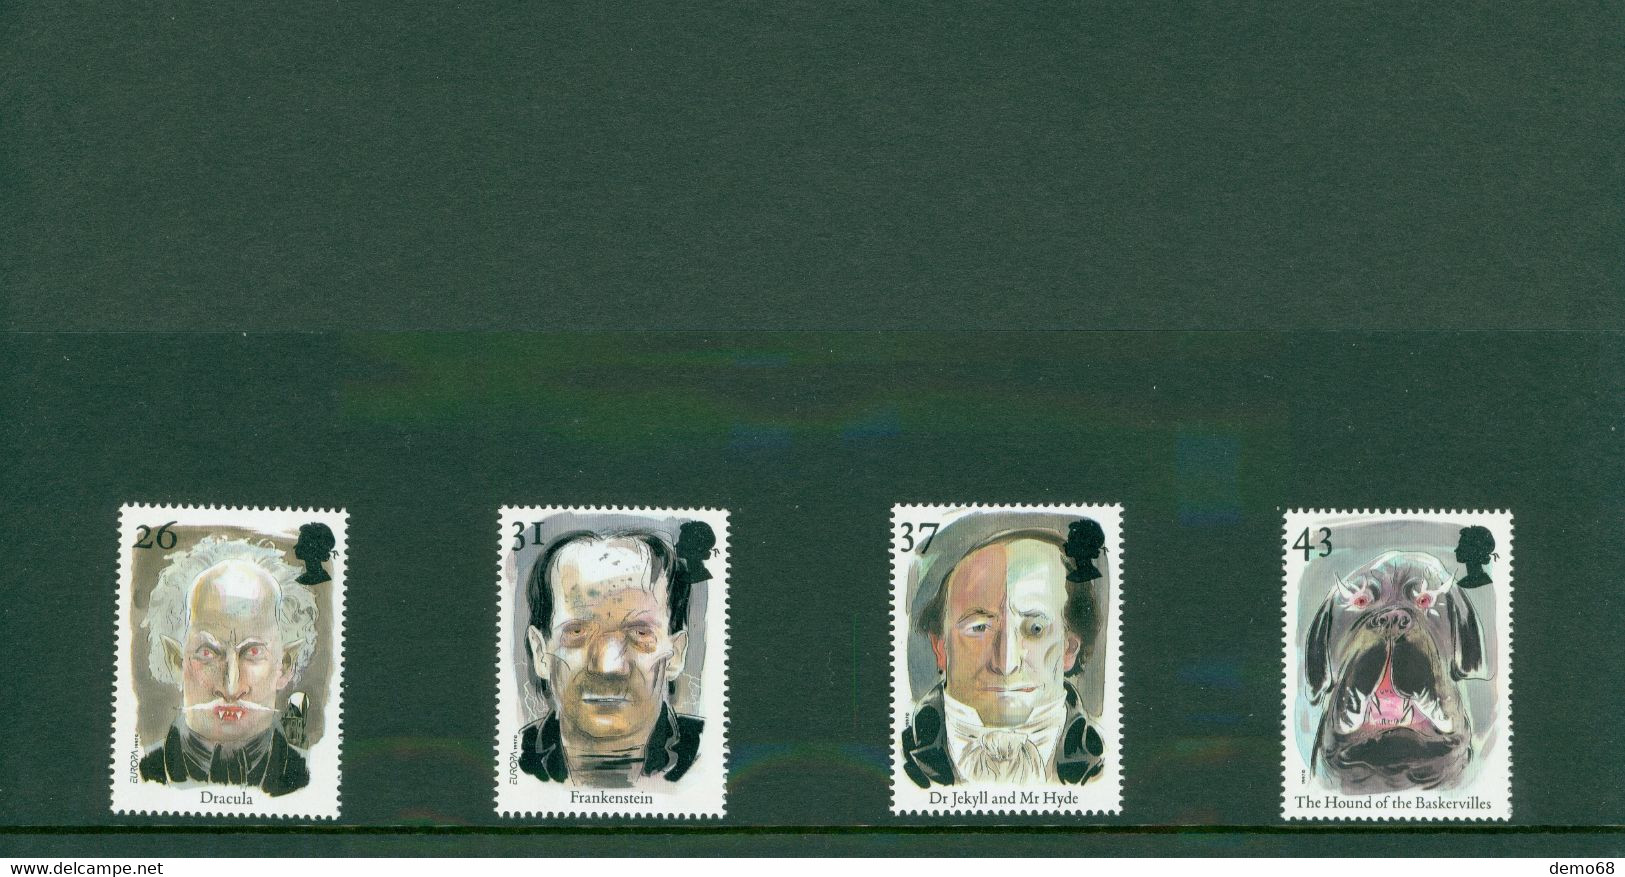 Stamp Timbre England Great Britain British Tales Of Terror Dracula Dr Jeckyll Frankenst. GB New 4 Royal Mail Mint Stamps - Collections